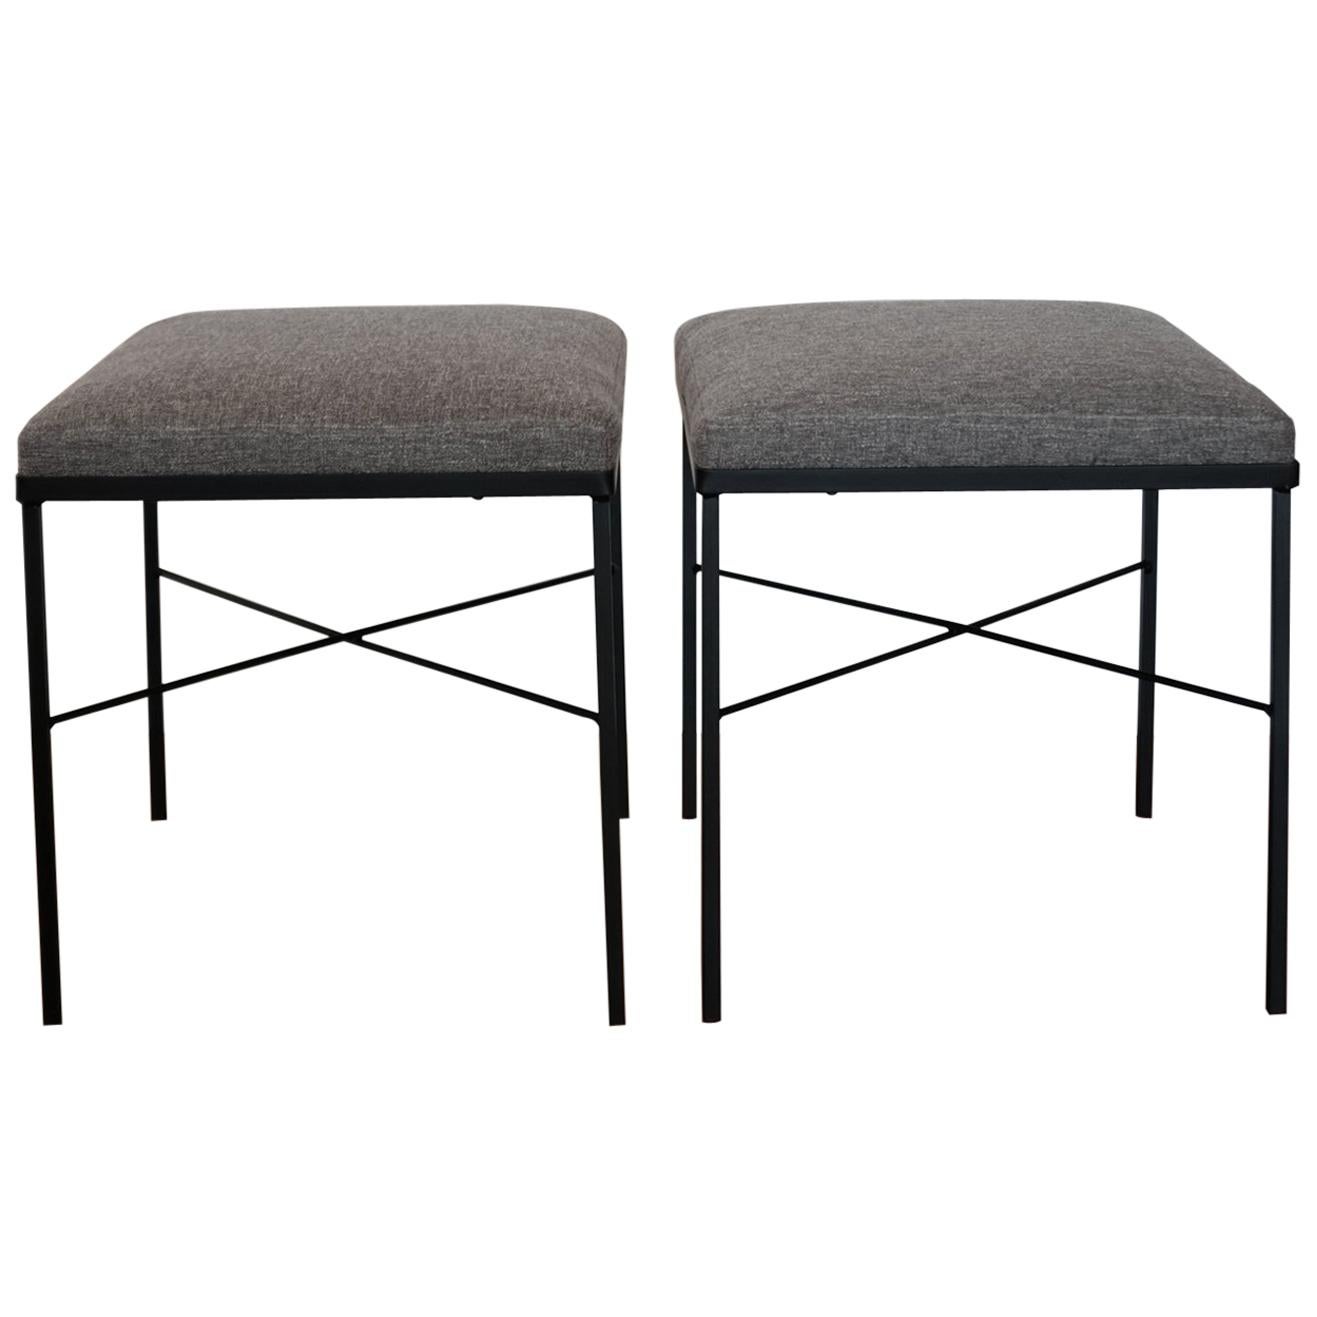 Pair of Iron X-Base Ottomans, 1950s For Sale